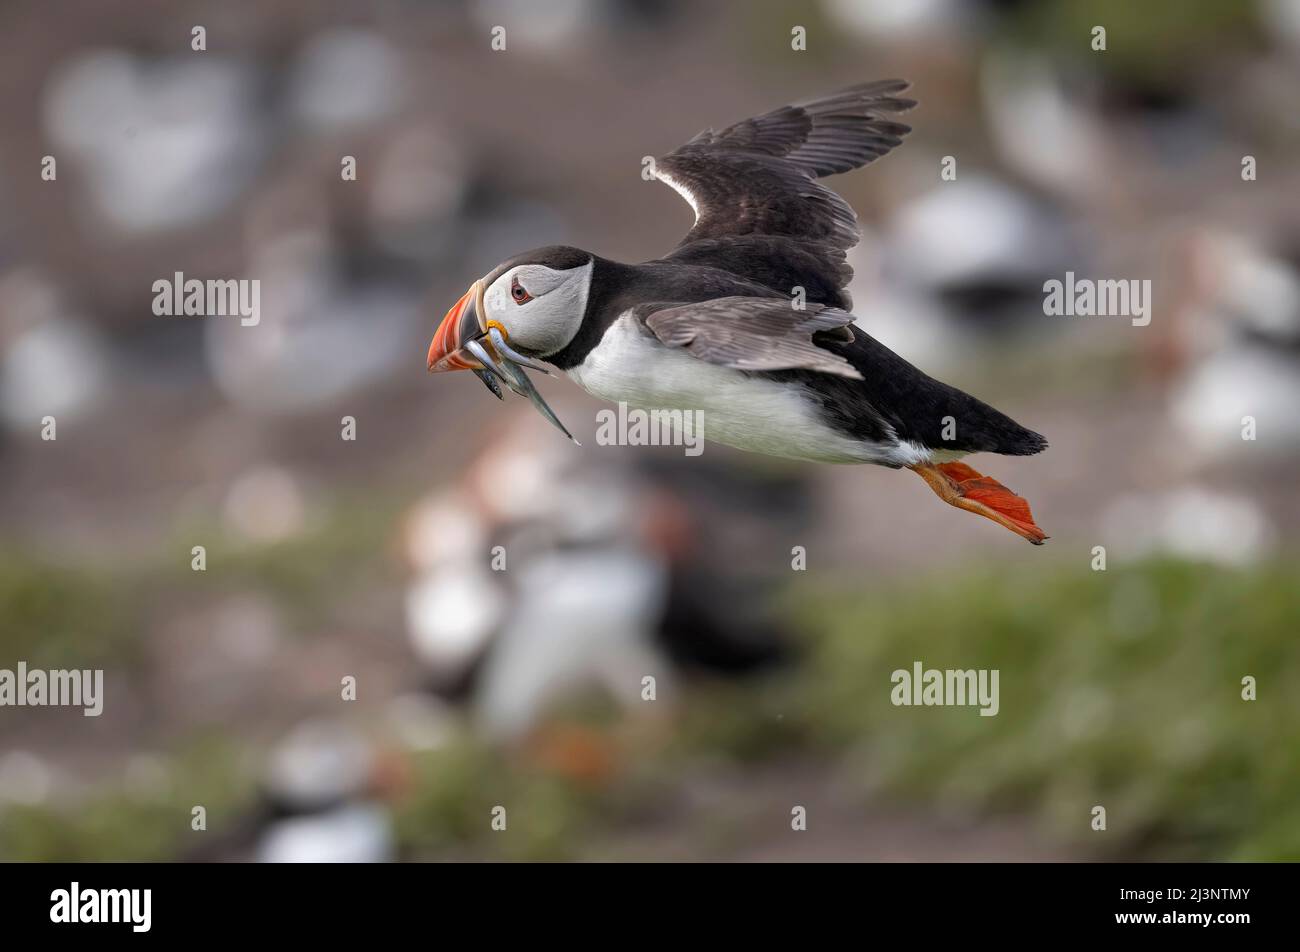 Puffin flying with a with a beak full of Sand eels, close up in the summer Stock Photo